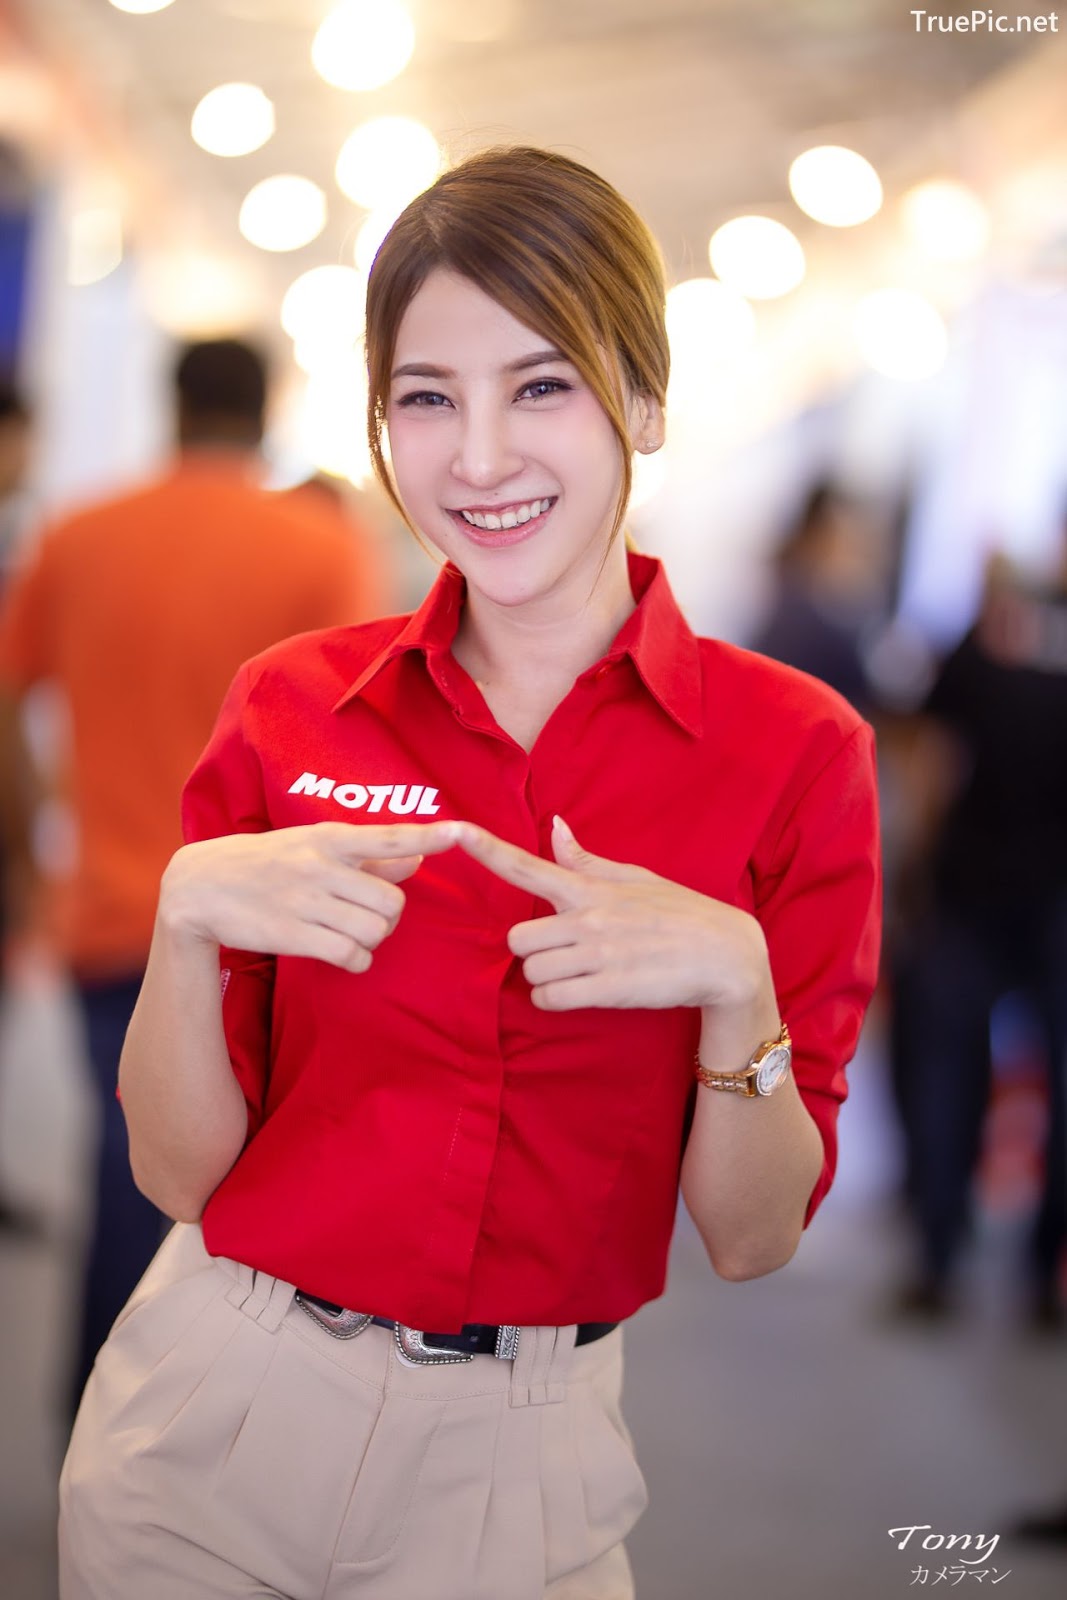 Image-Thailand-Hot-Model-Thai-Racing-Girl-At-Motor-Show-2019-TruePic.net- Picture-49